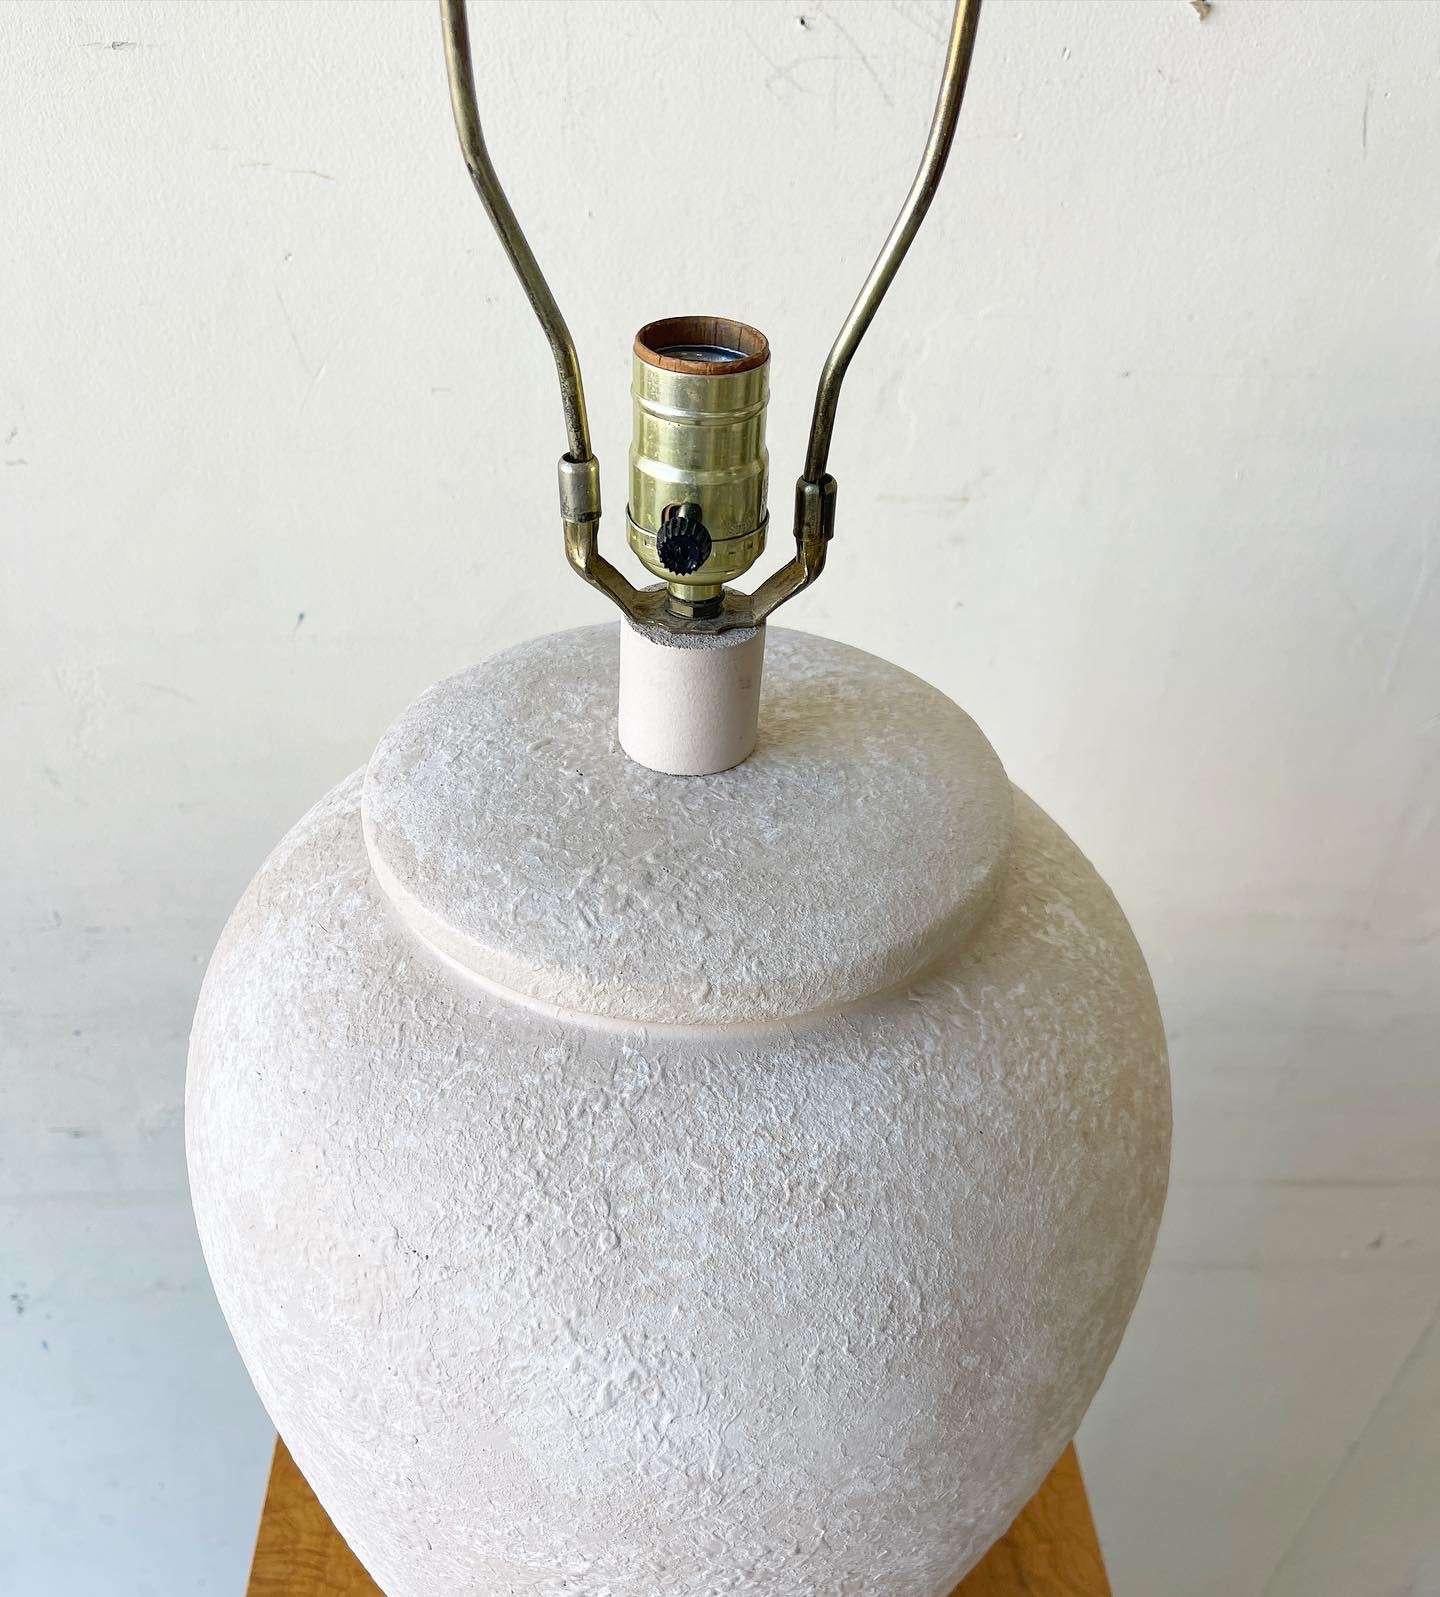 Exceptional vintage postmodern ceramic table lamp. Features a textured almond finish.

3 way lighting
